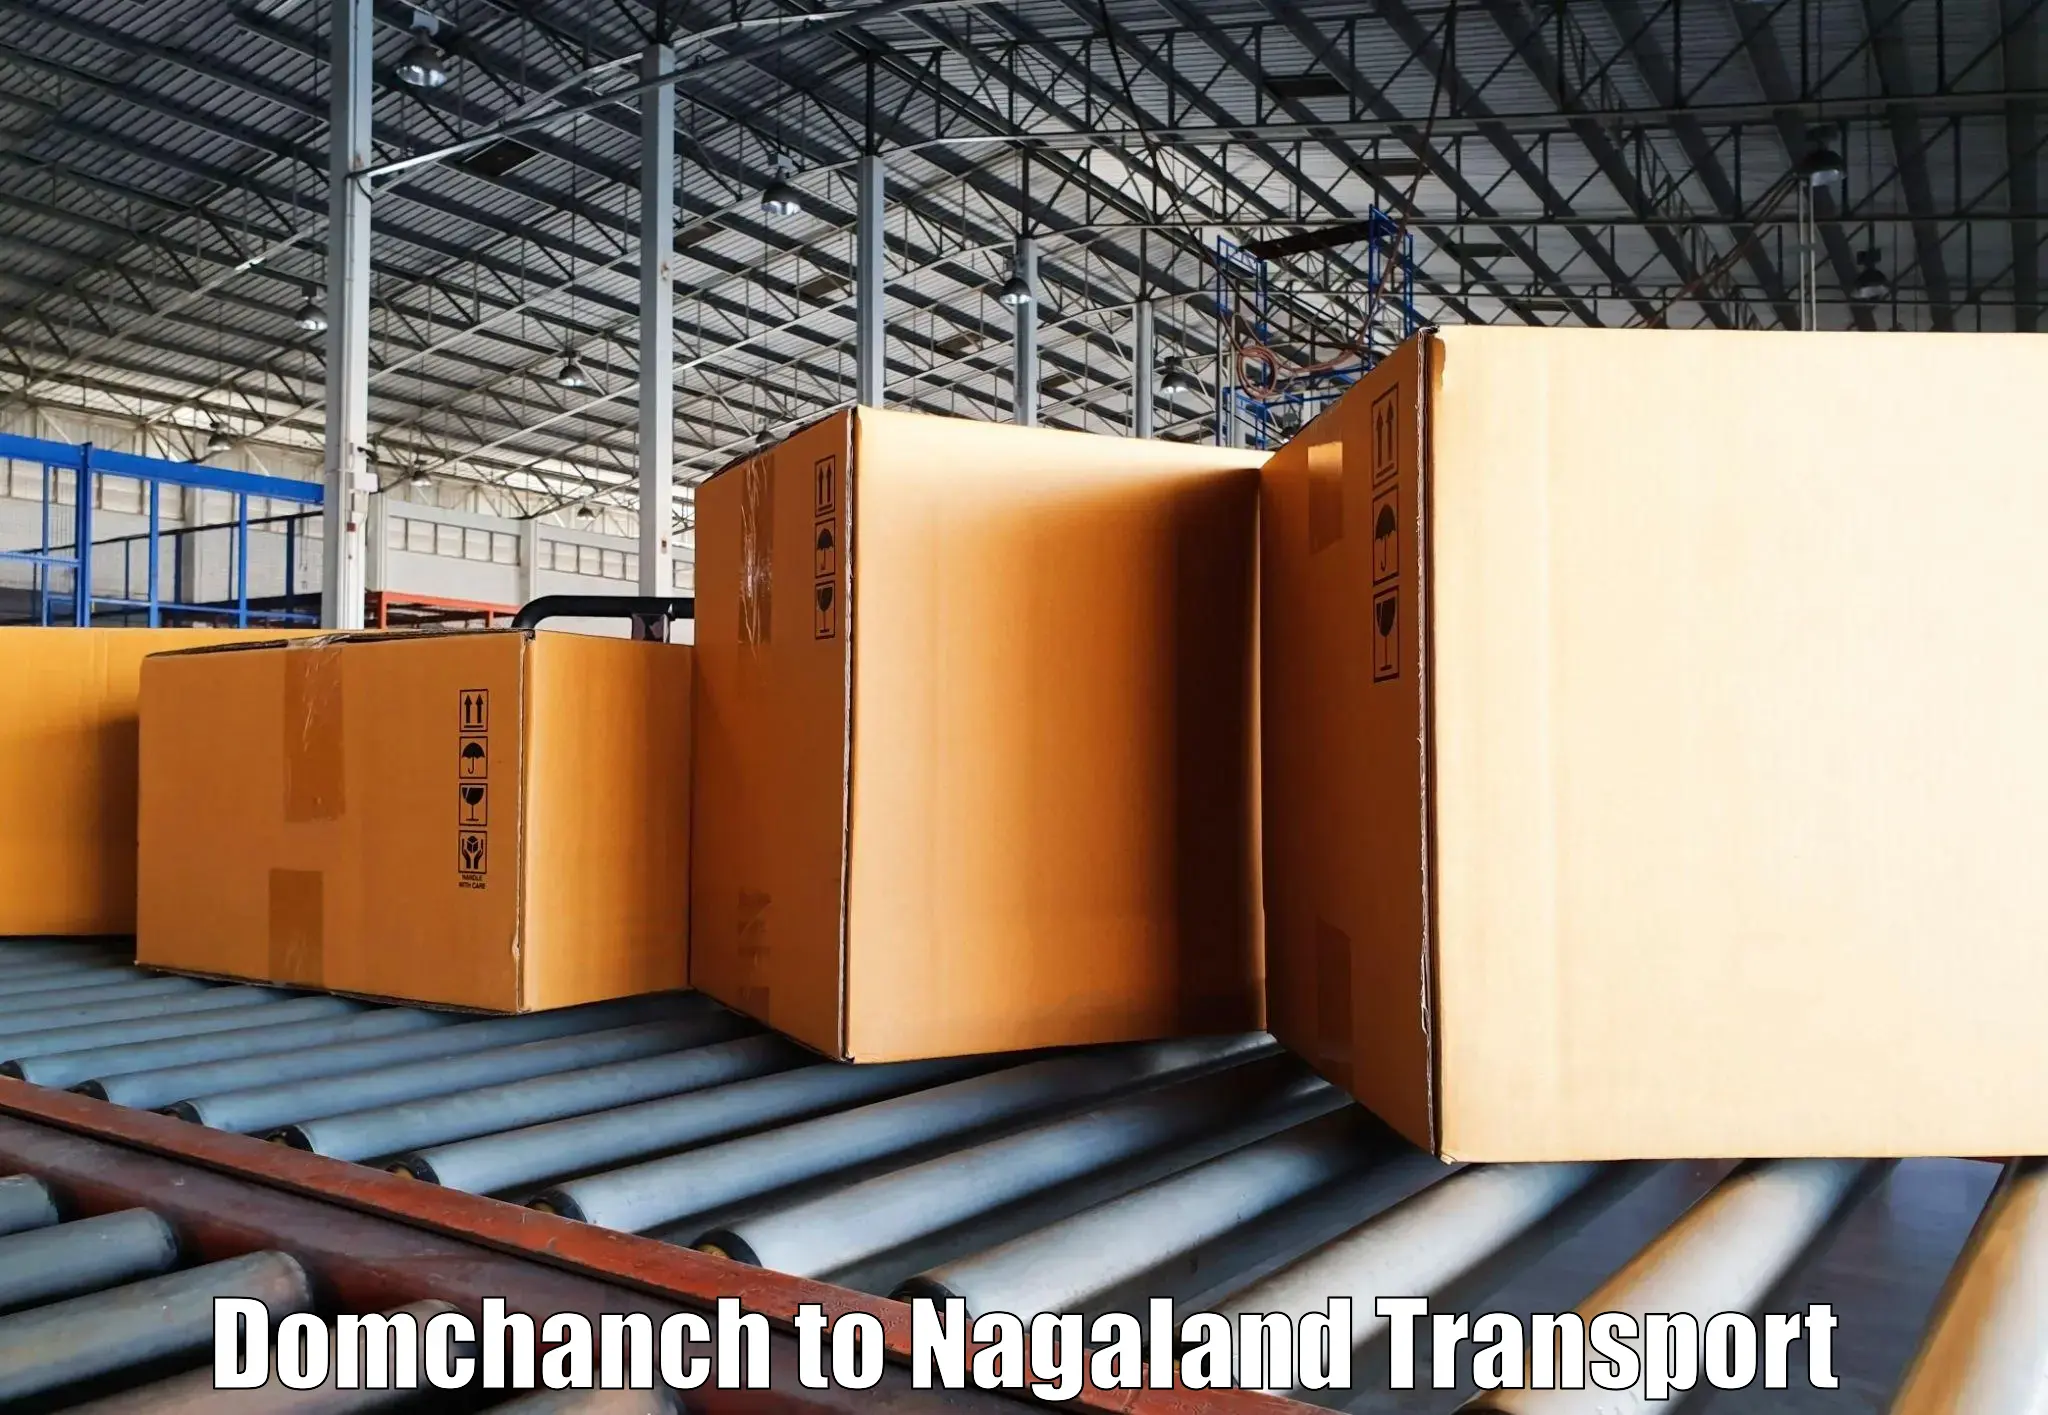 Delivery service in Domchanch to Nagaland